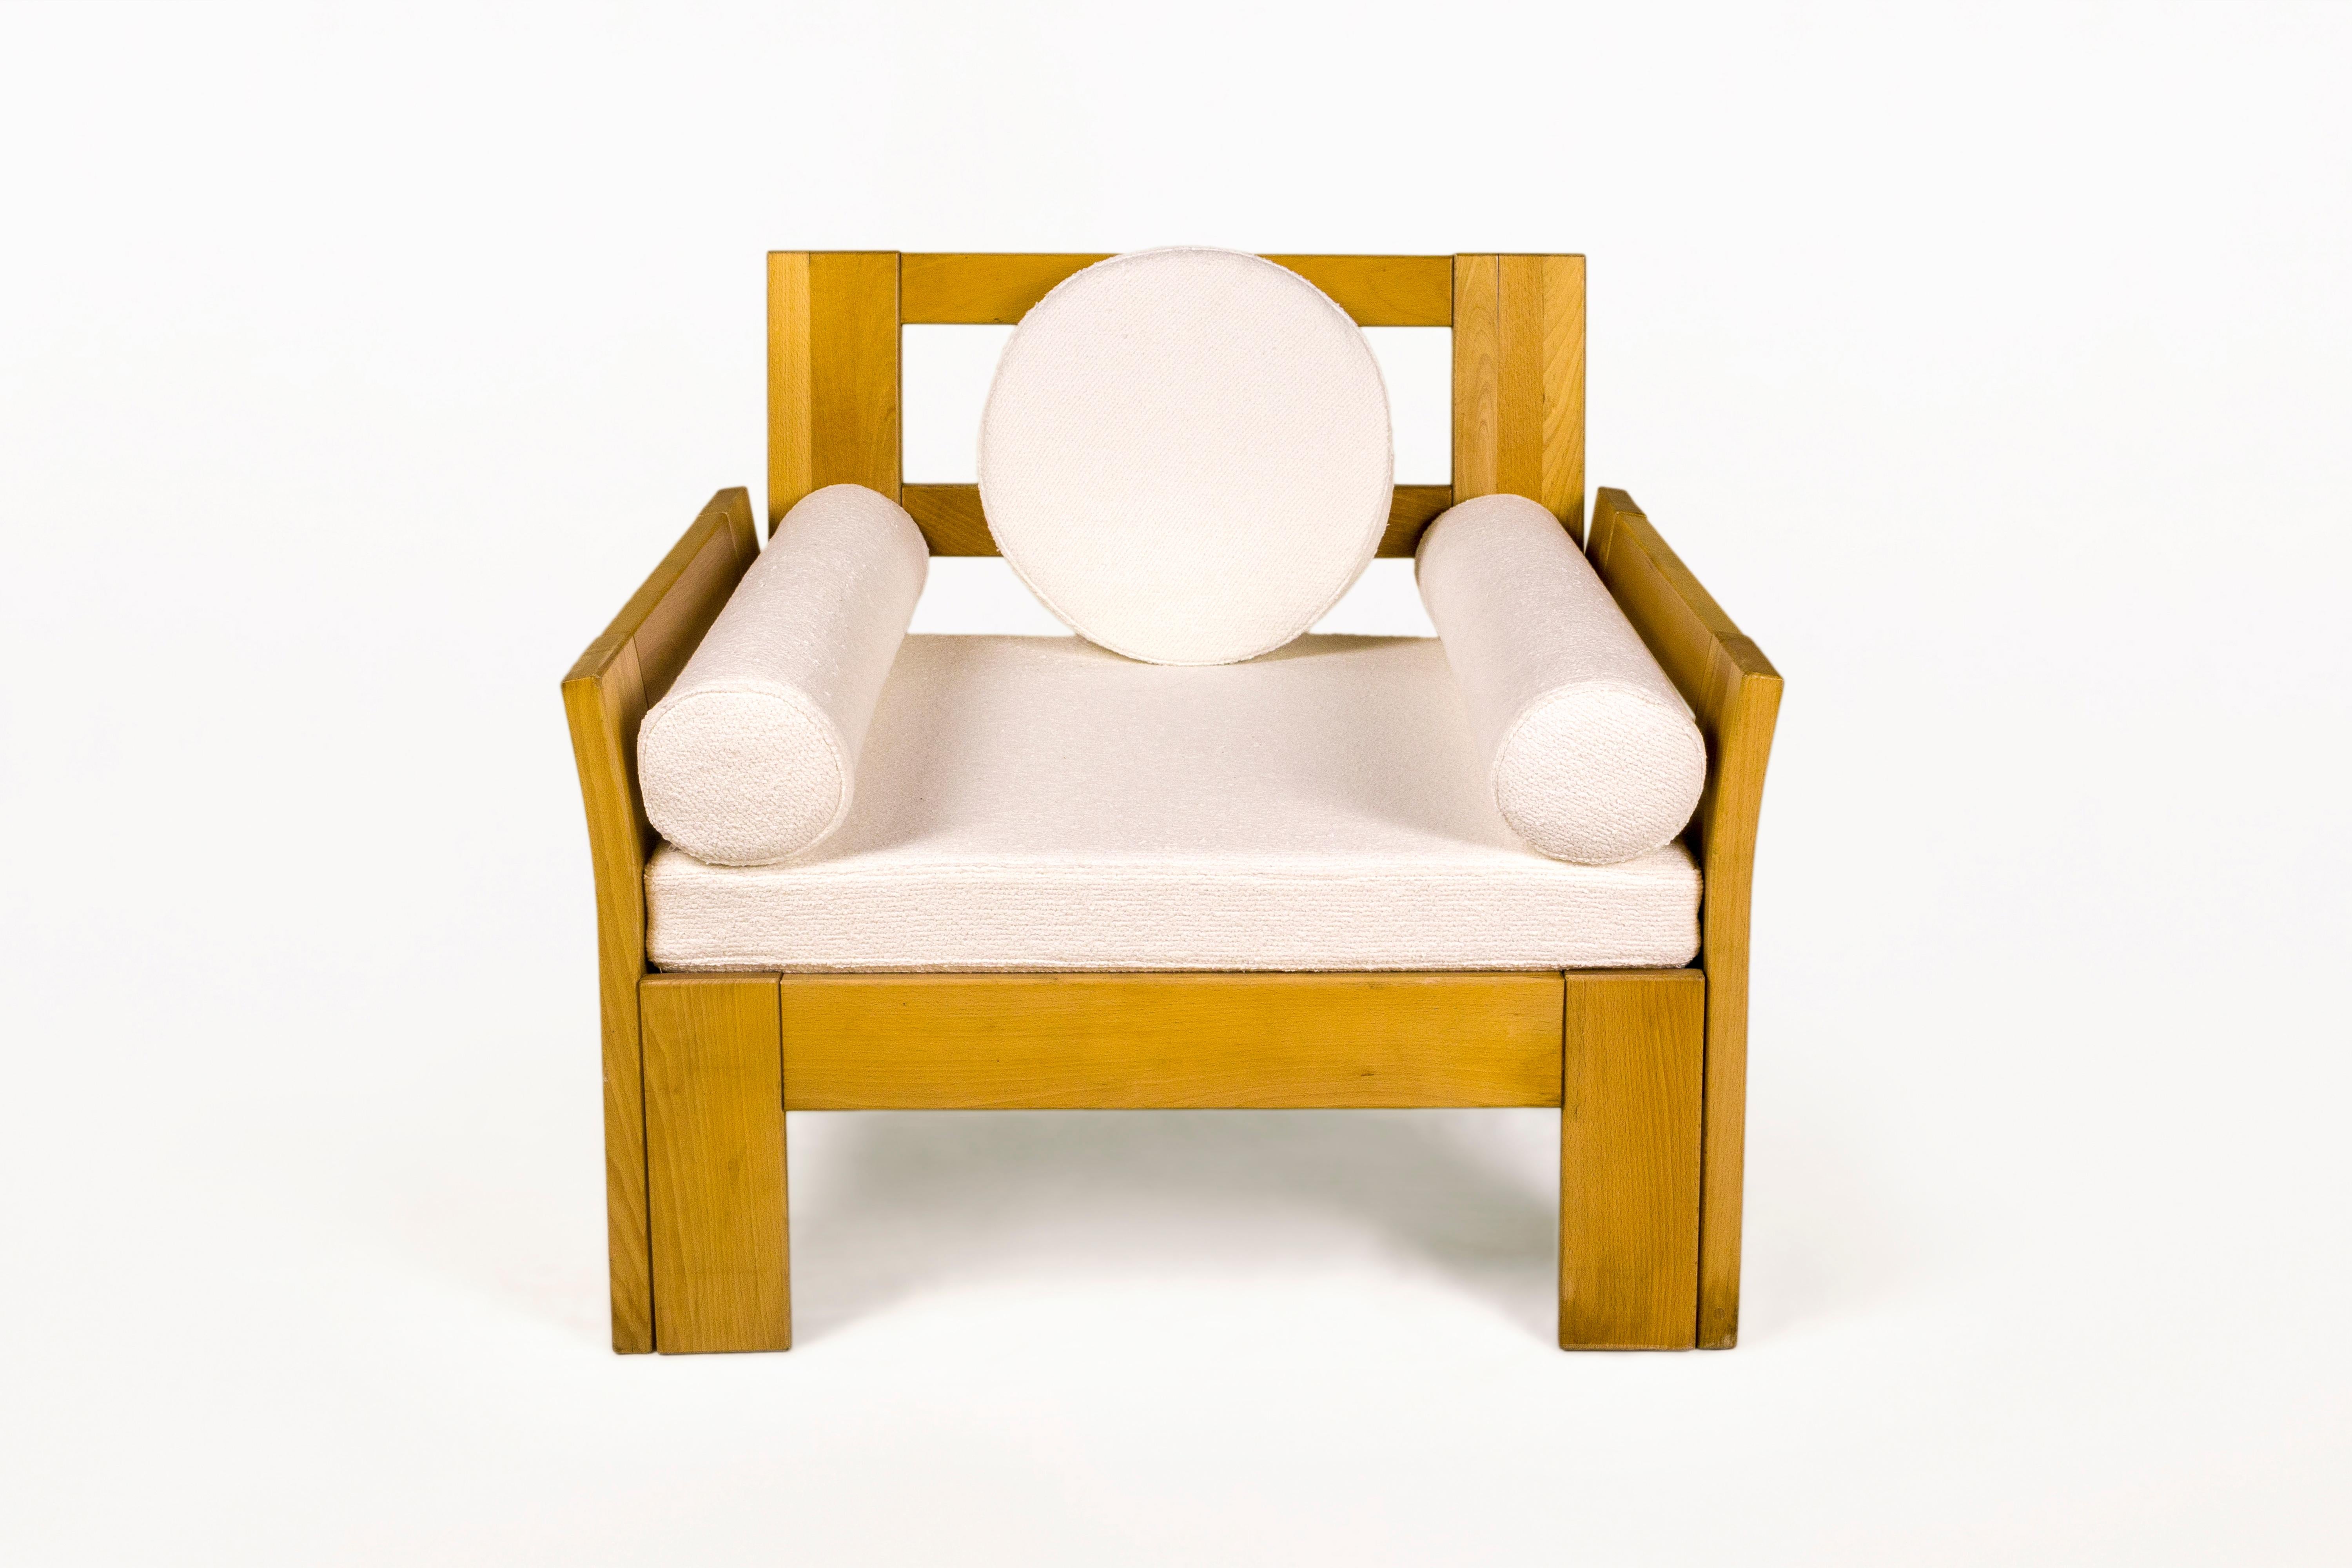 Pair of Armchairs.
Made with ash and with white upholster.
Very decorative.
Solid structure.
Circa 1960, Italy.
Very good vintage condition.
Mid-Century Modern (MCM) is a design movement in interior, product, graphic design, architecture, and urban